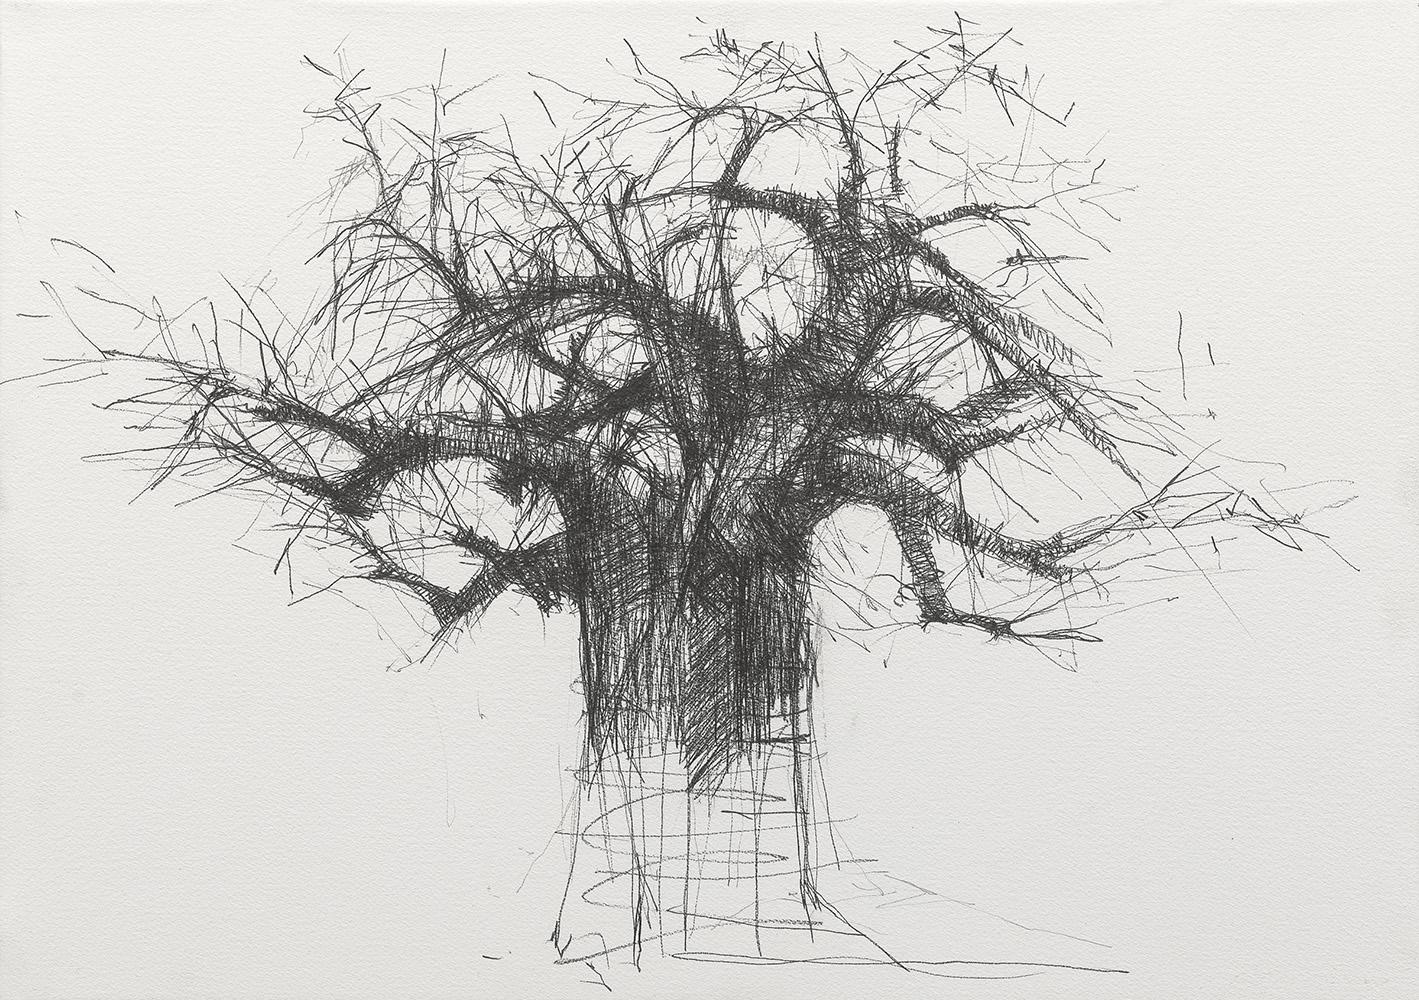 Baobab N7 by Calo Carratalá - work on paper, graphite drawing, sold framed